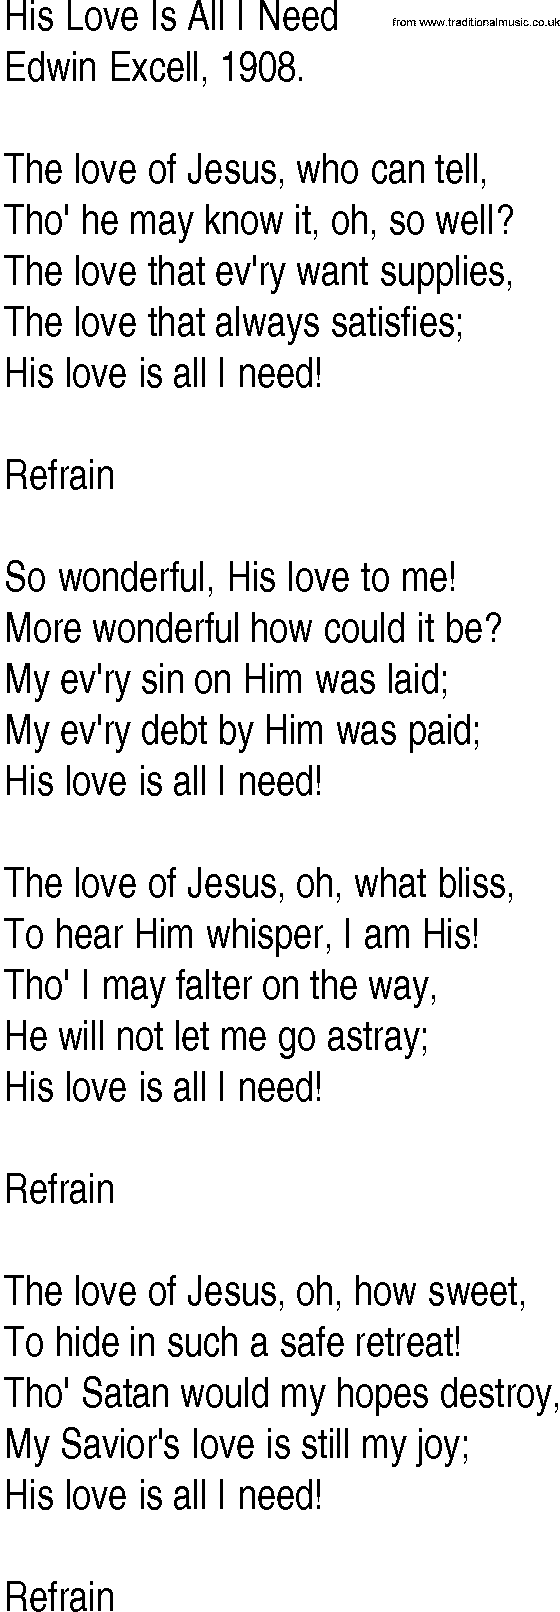 Hymn and Gospel Song: His Love Is All I Need by Edwin Excell lyrics